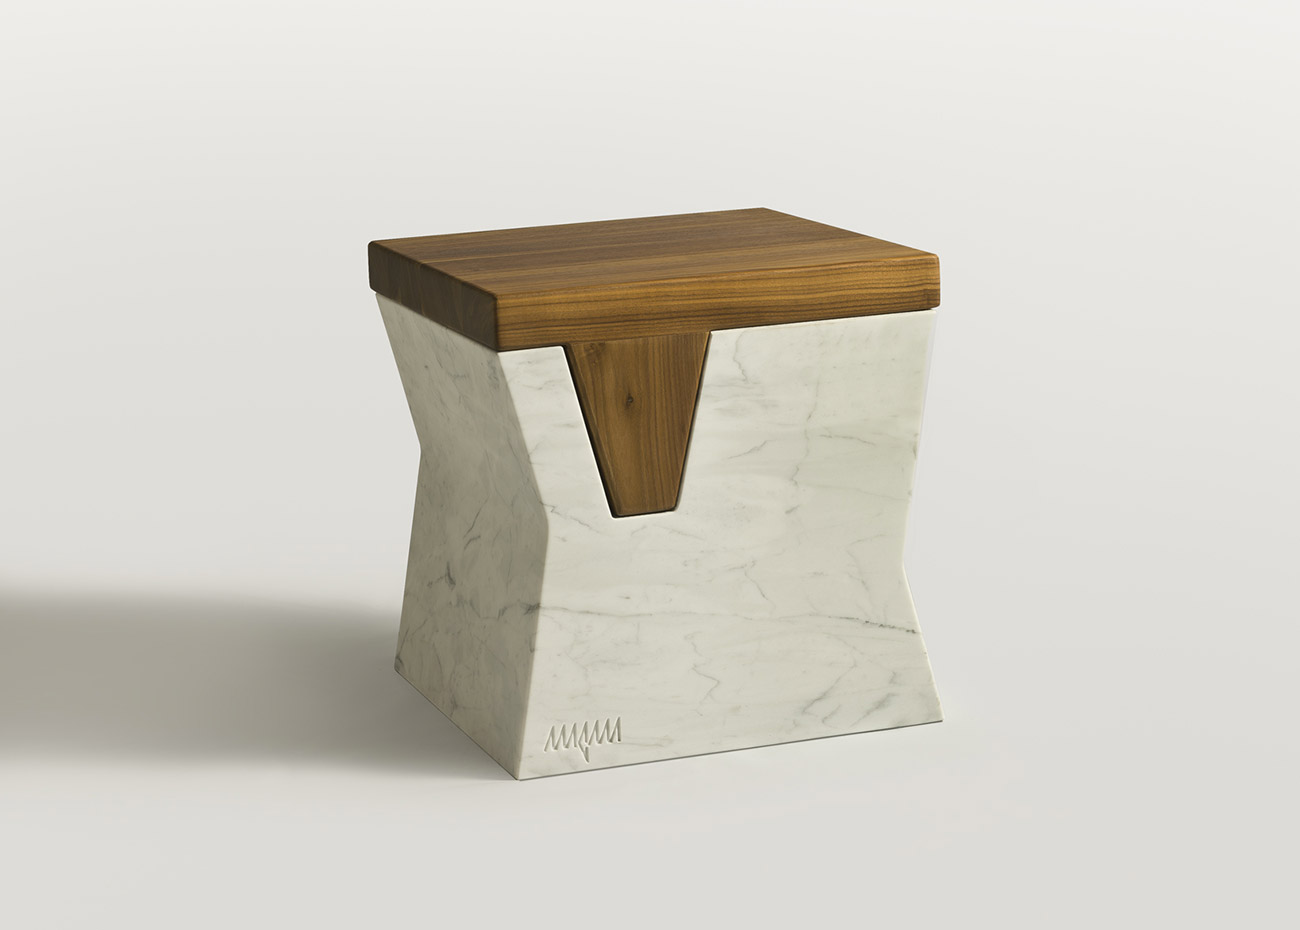 plaza-pouf-with-wood-seat